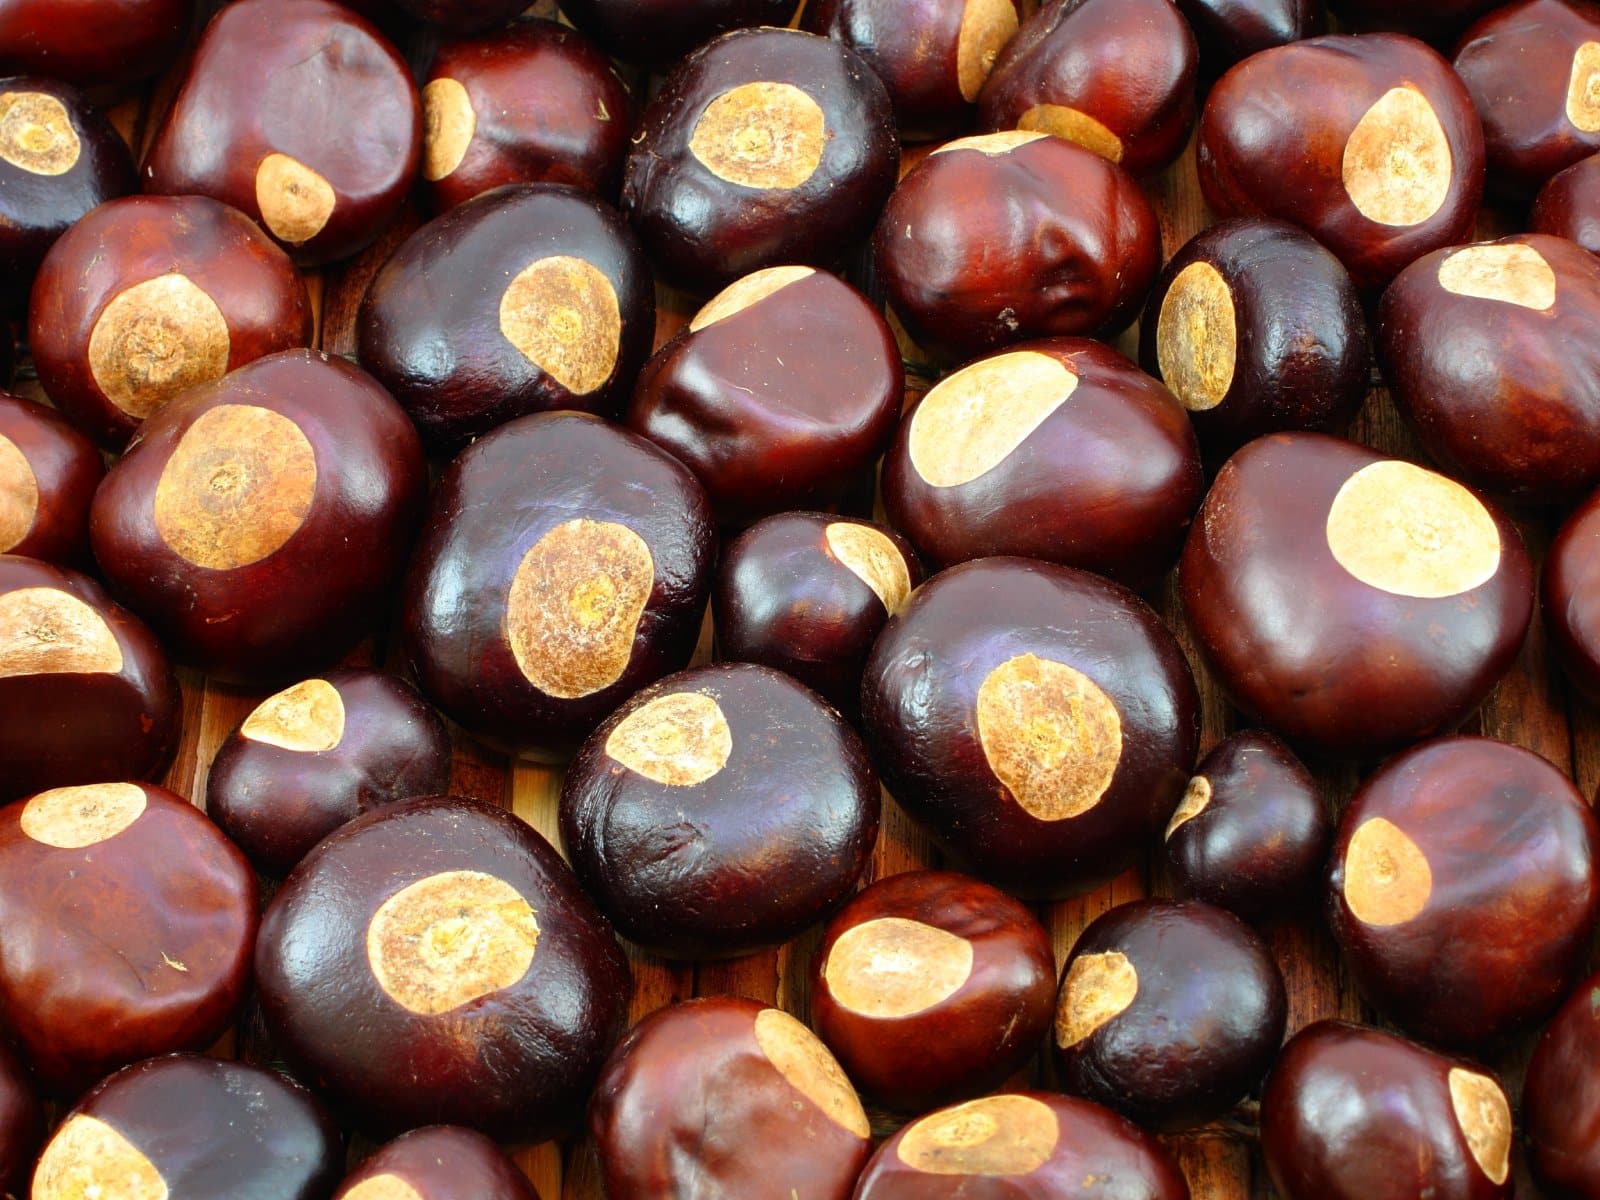 <p class="wp-caption-text">Image Credit: Shutterstock / cvm</p>  <p><span>From candy to clothing, if it can be shaped like a buckeye or named after one, Ohioans are on it.</span></p>